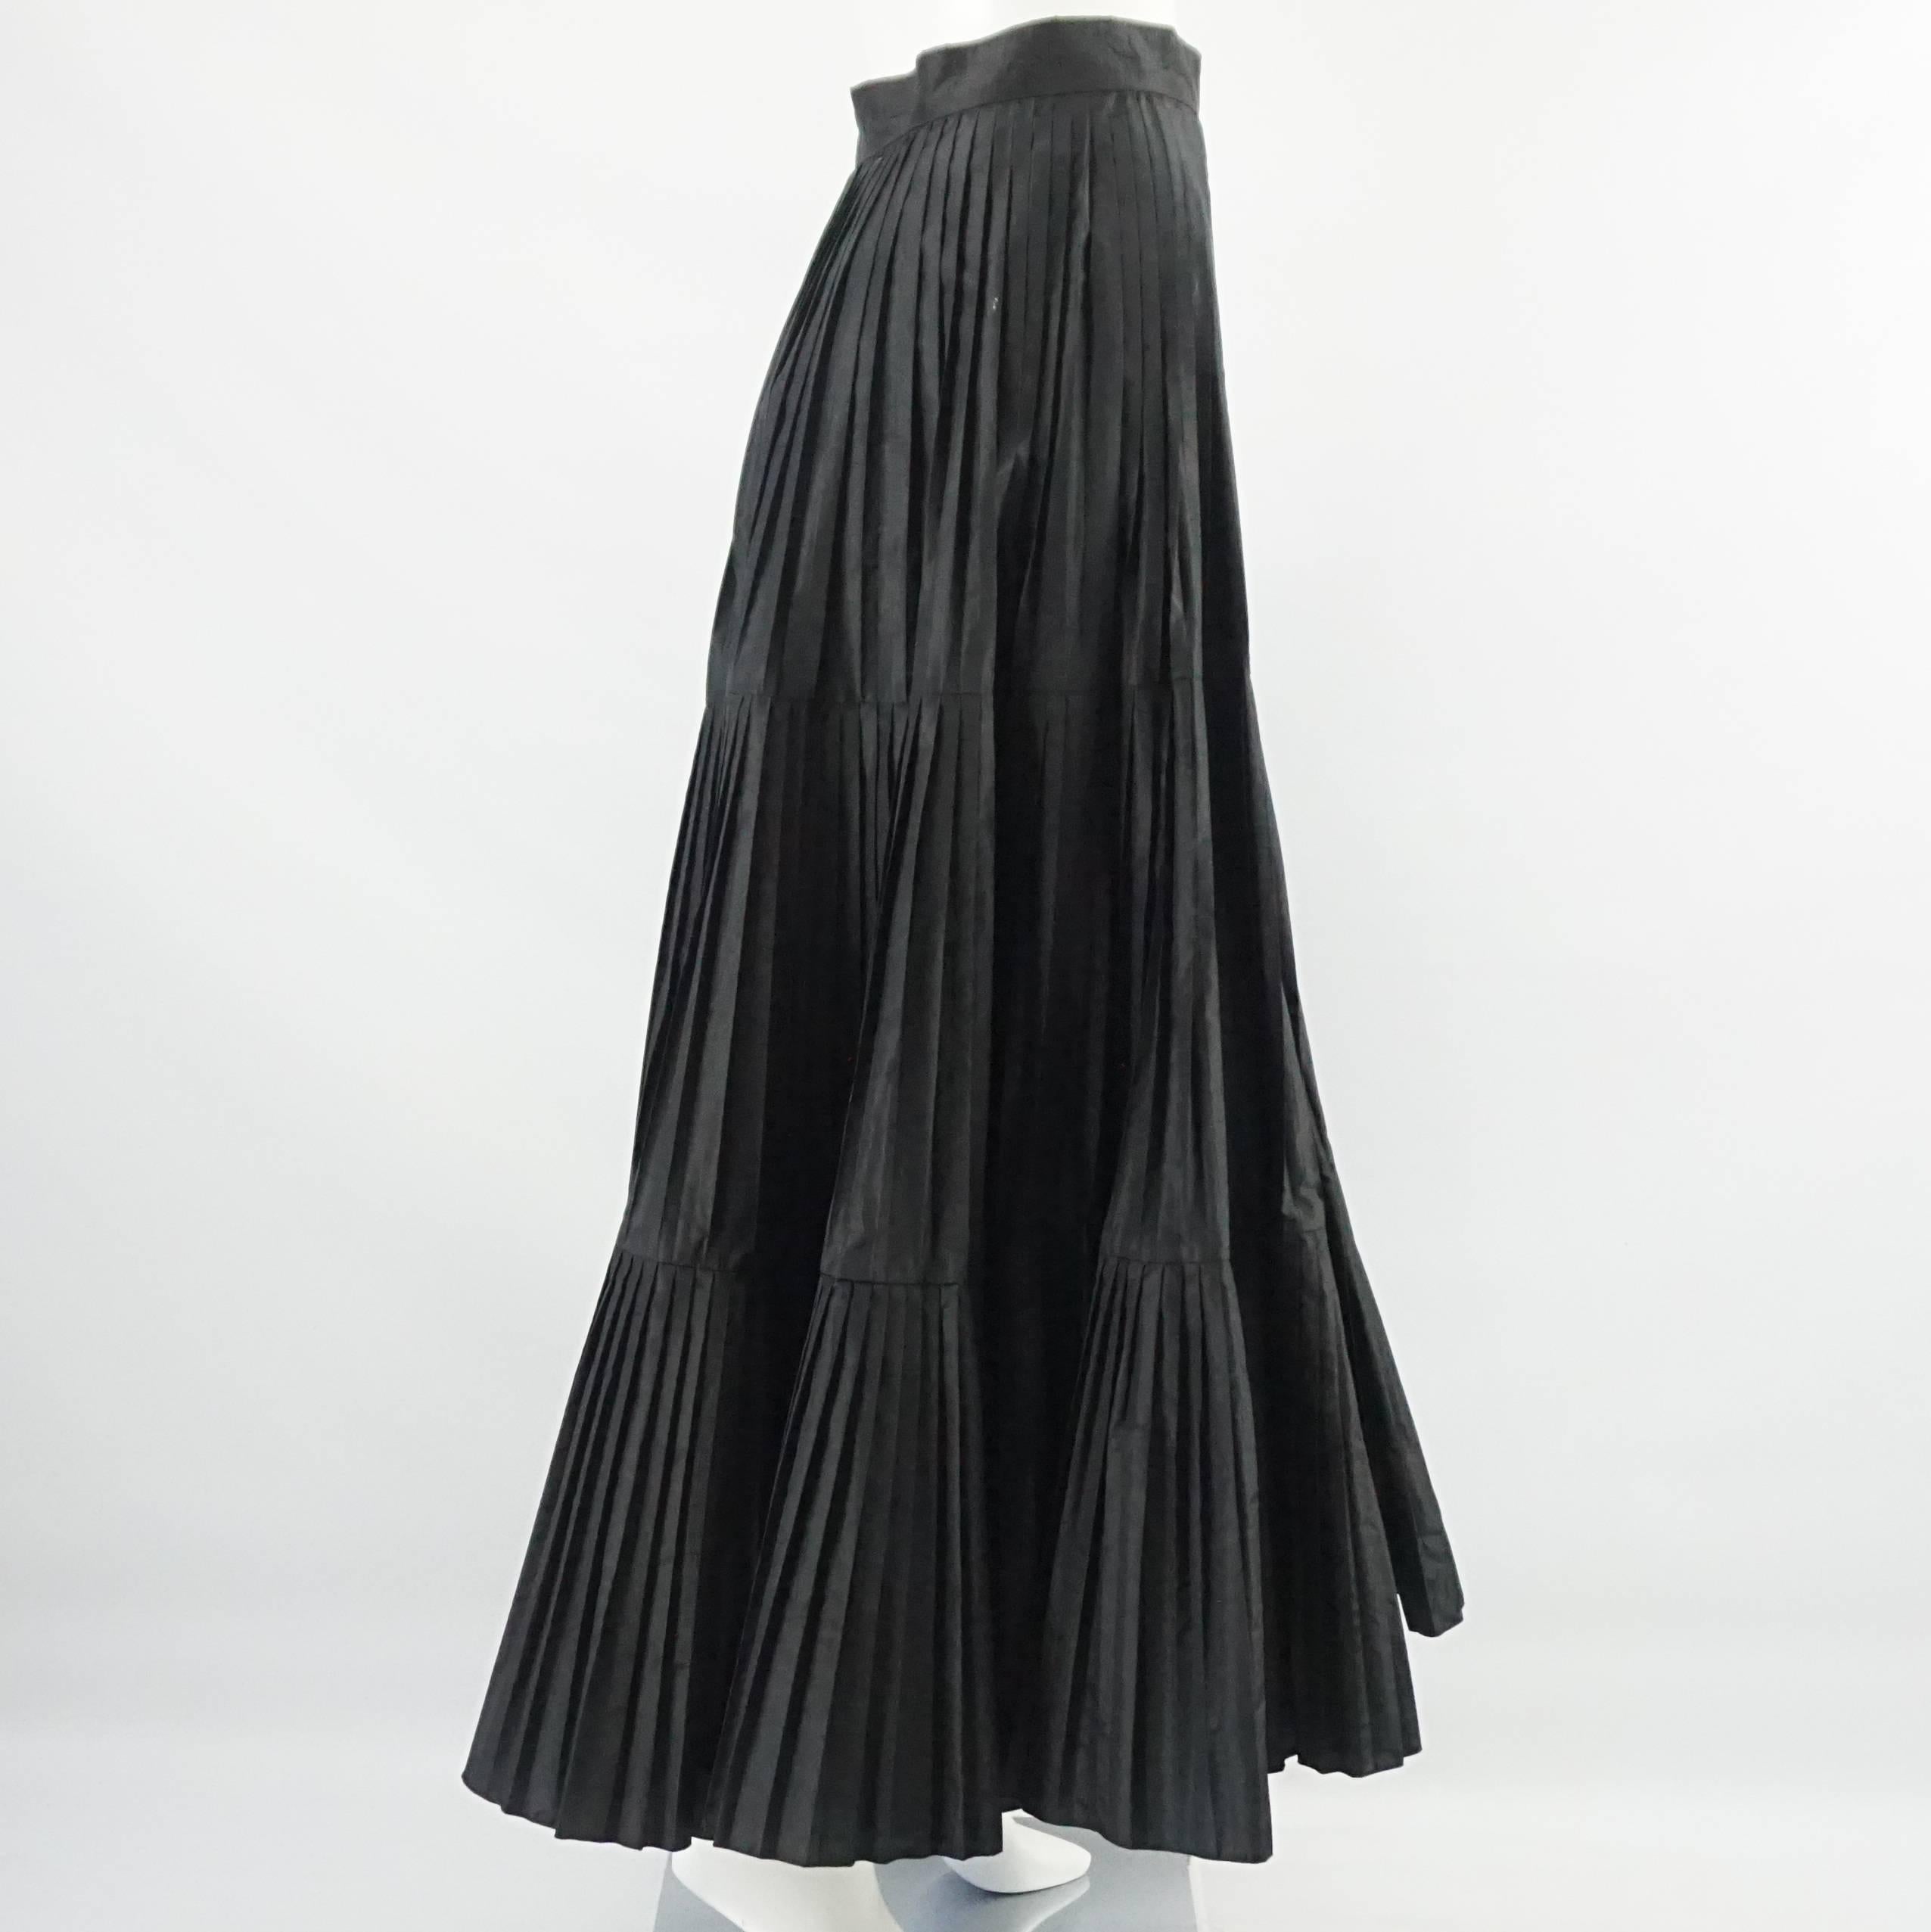 Serge & Real Black Taffeta Pleated Long Skirt - M. This Serge & Real long skirt is black taffeta. It is pleated and loose. This skirt is in good condition with minor marks and a sticky residue on it- needing dry cleaning. Size